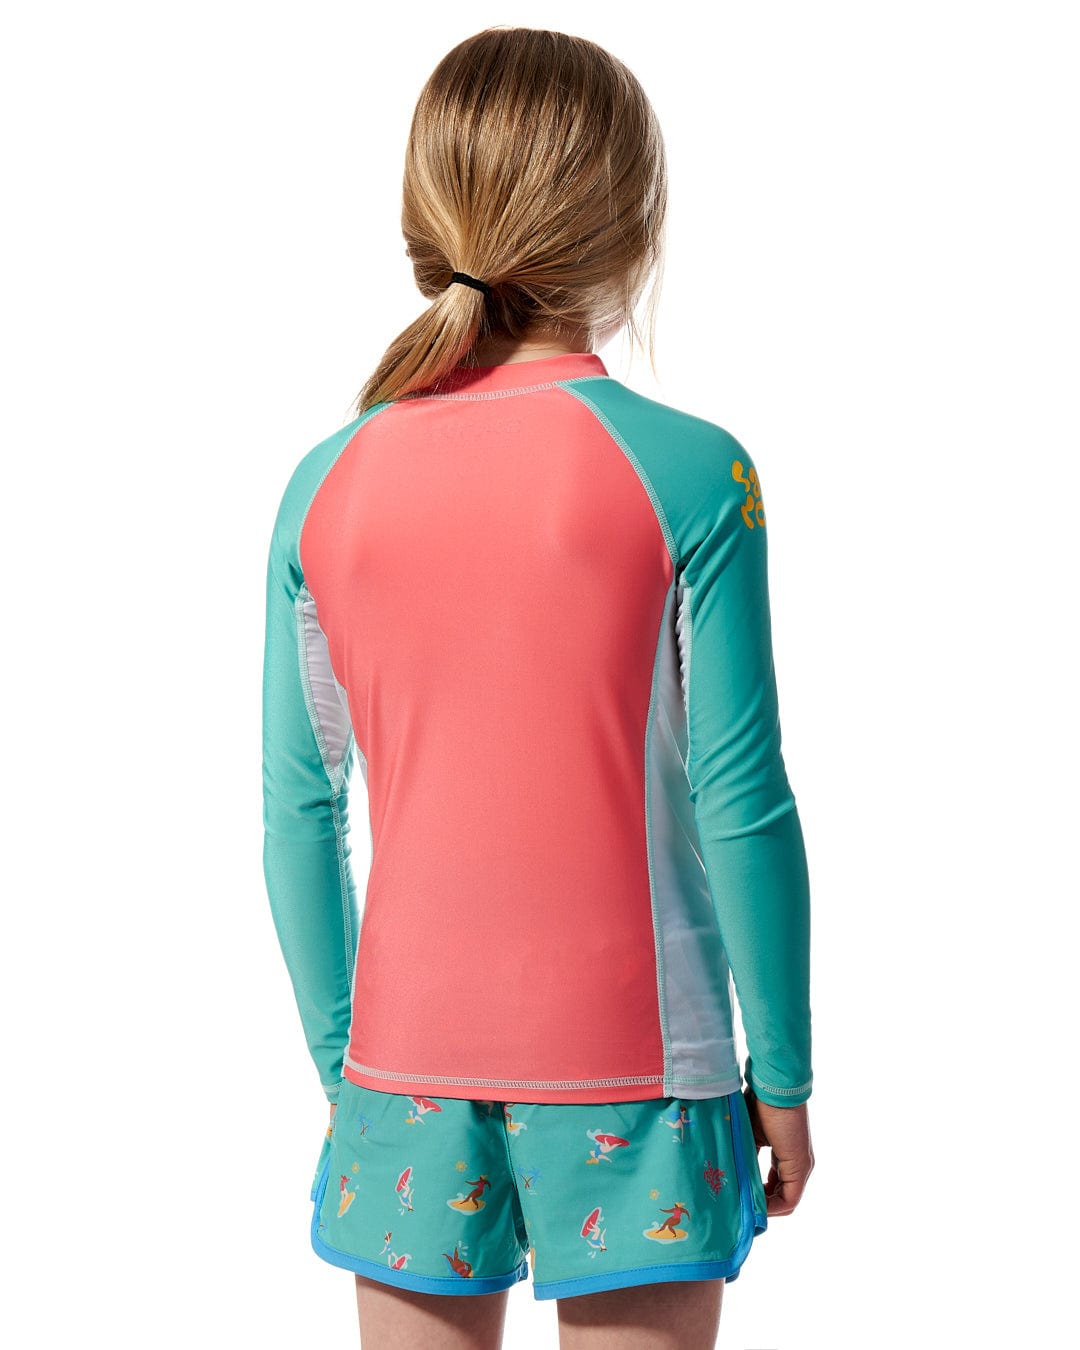 A girl's back view of a Saltrock Surf Sister - Kids Long Sleeve Rashvest - Coral/Turquoise.